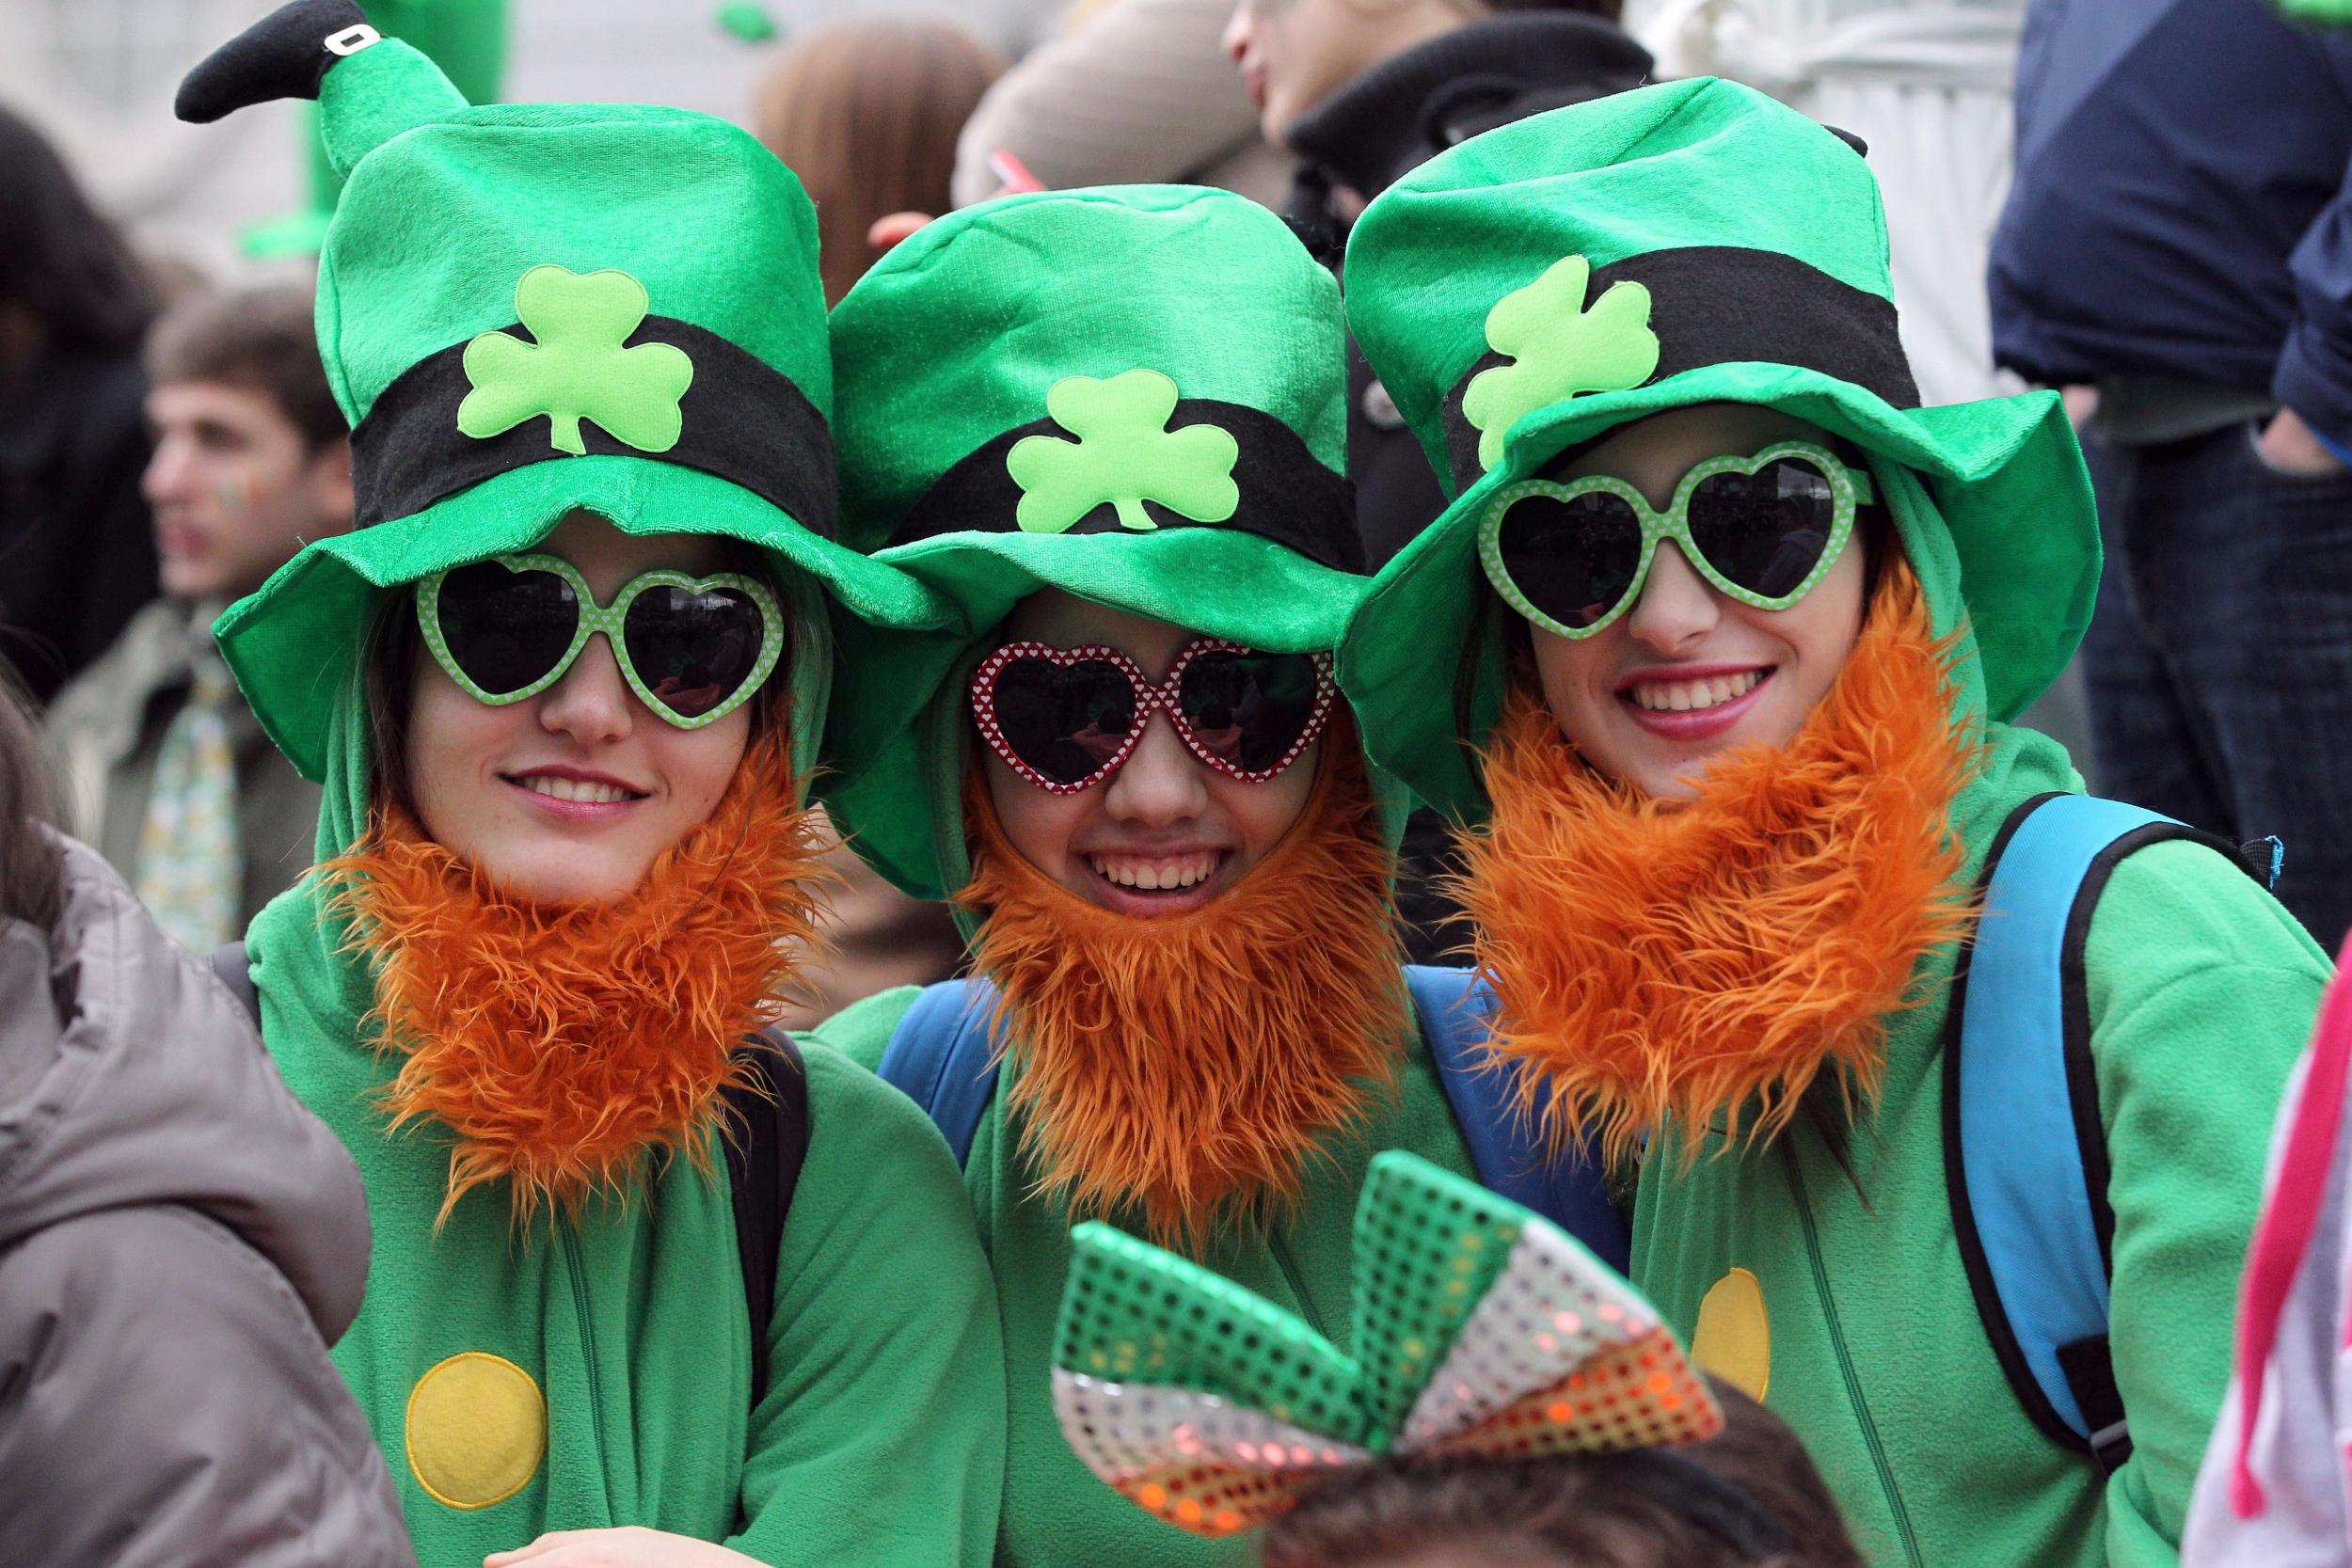 St Patrick's Day in Dublin sees an influx of tourists and drinking. It's time to stop, say these locals